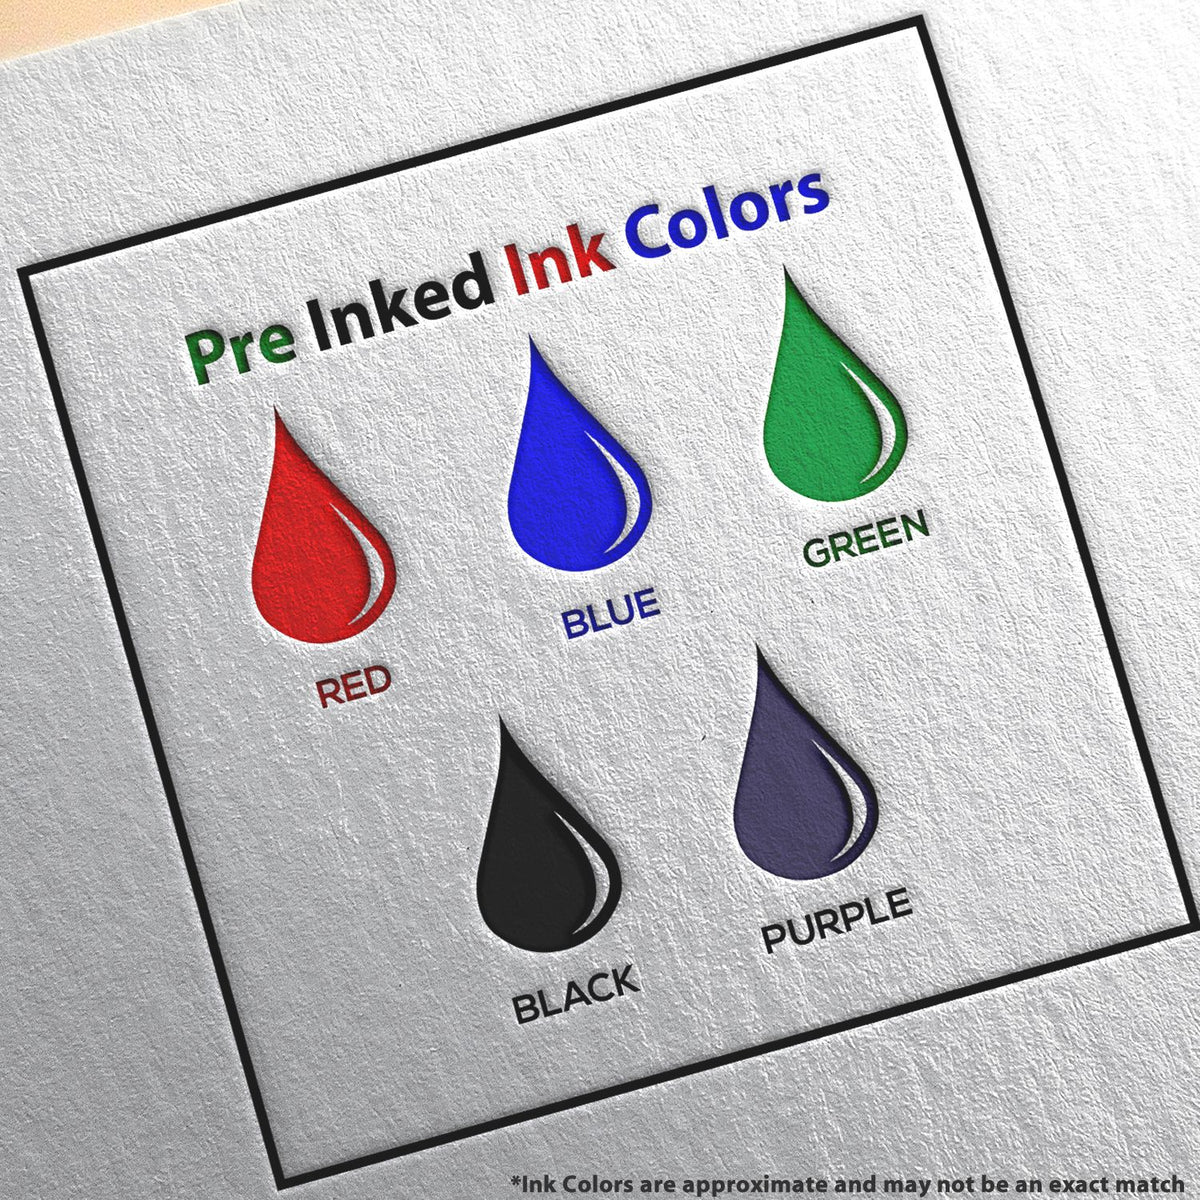 A picture showing the different ink colors or hues available for the Slim Pre-Inked Minnesota Land Surveyor Seal Stamp product.